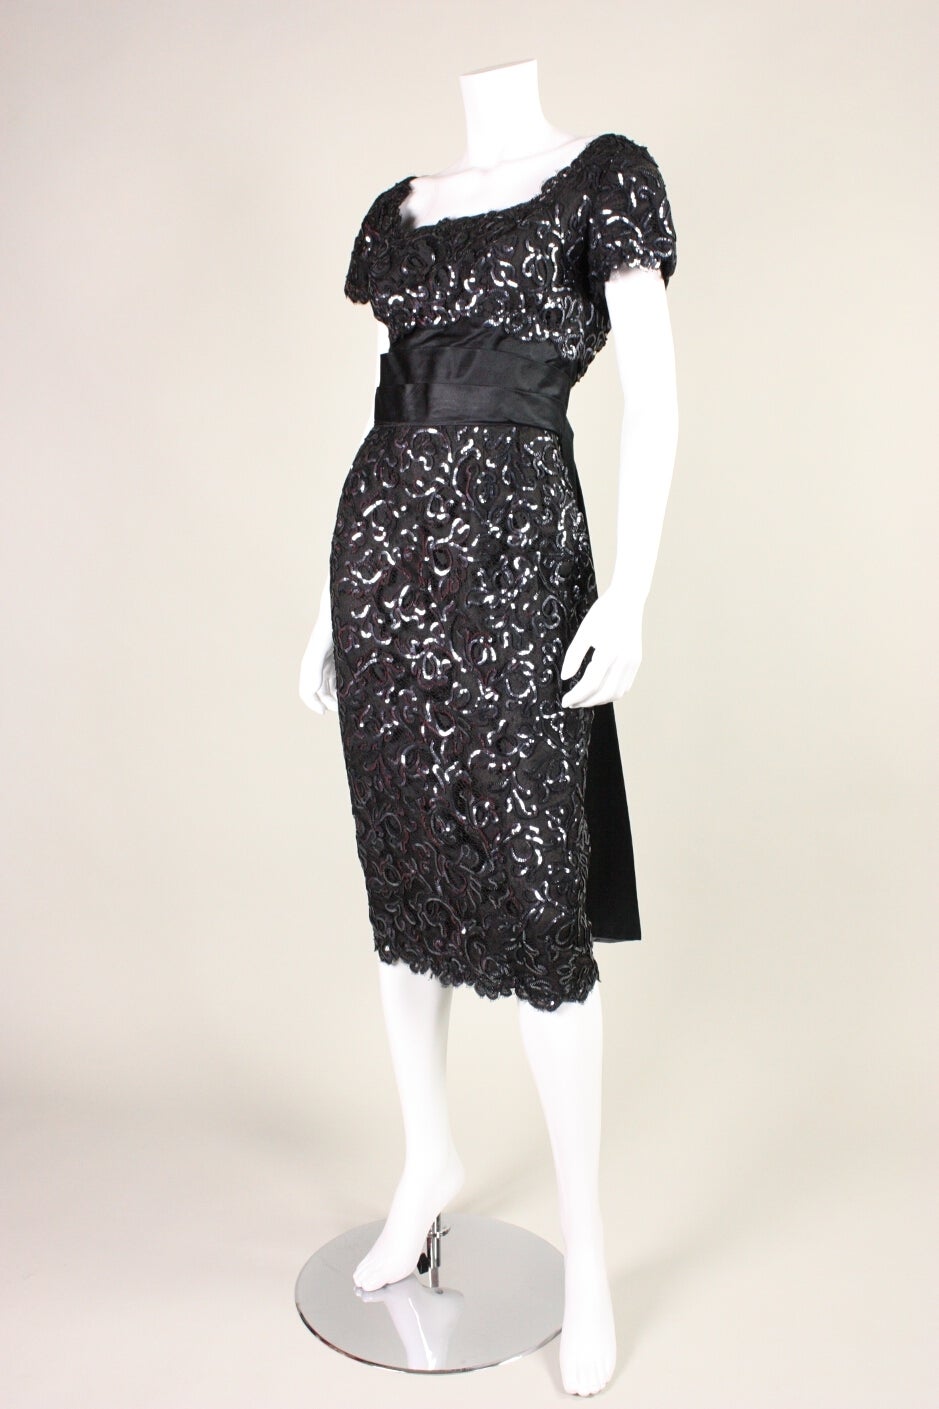 Vintage cocktail dress from Maxwell Shieff Beverly Hills is made of black lace with gunmetal gray sequins sewn on to echo the pattern of the lace.  Pleated black satin waistband.  Back train has gray silk on underside that compliments the color of